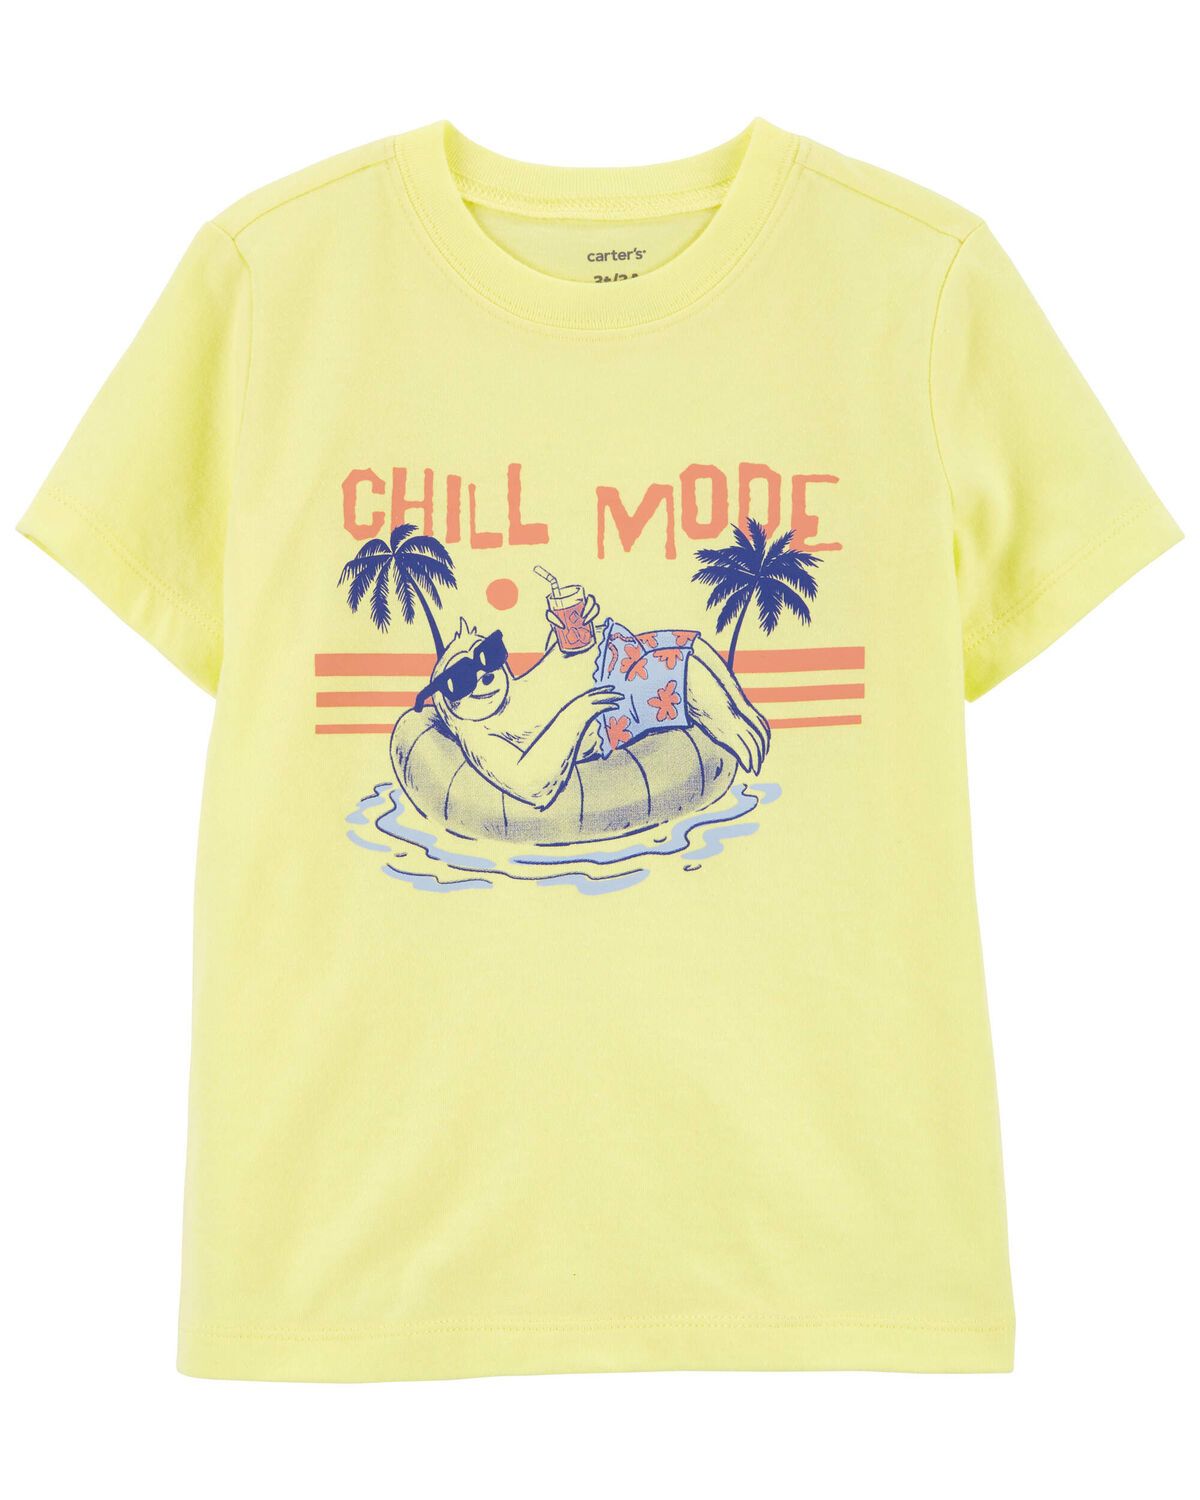 Toddler Sloth Chill Vibes Graphic Tee | Carter's